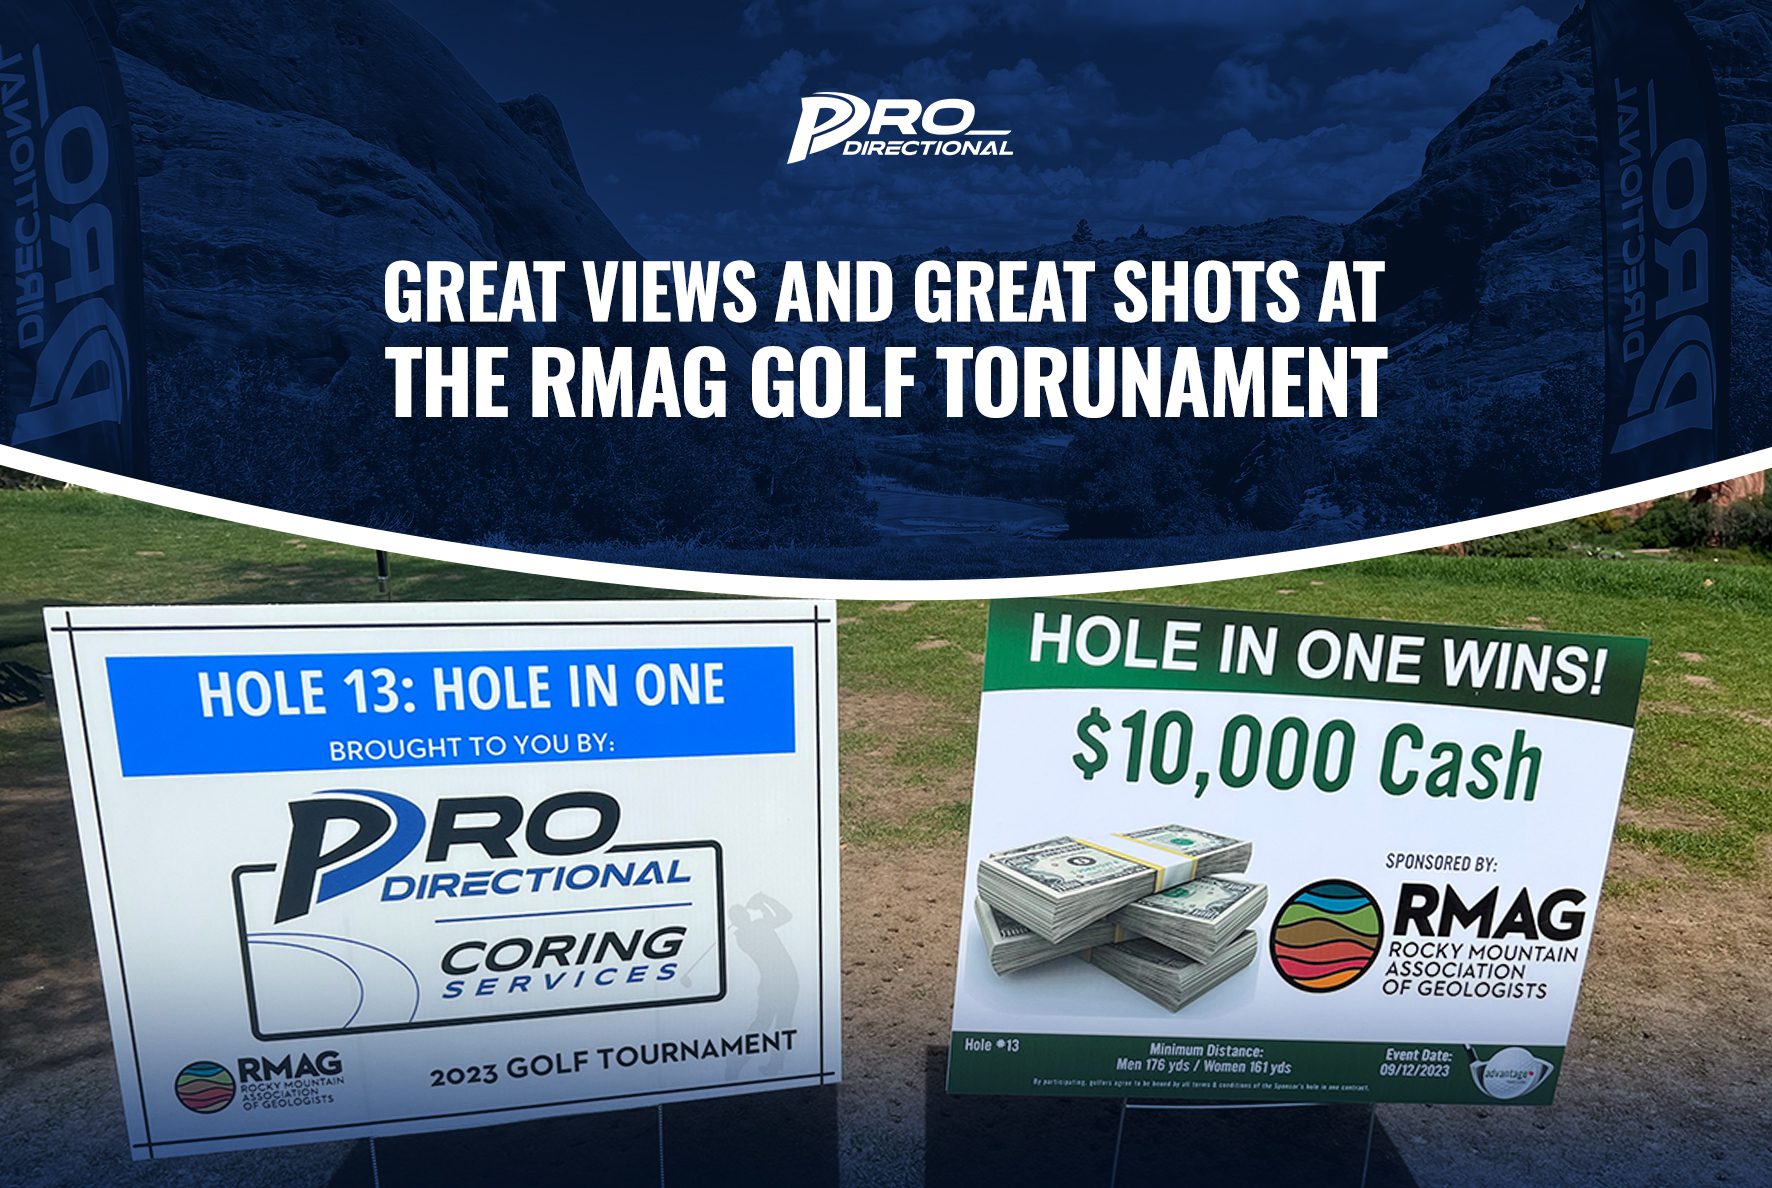 Featured image for “Great views and great shots at the RMAG golf tournament”